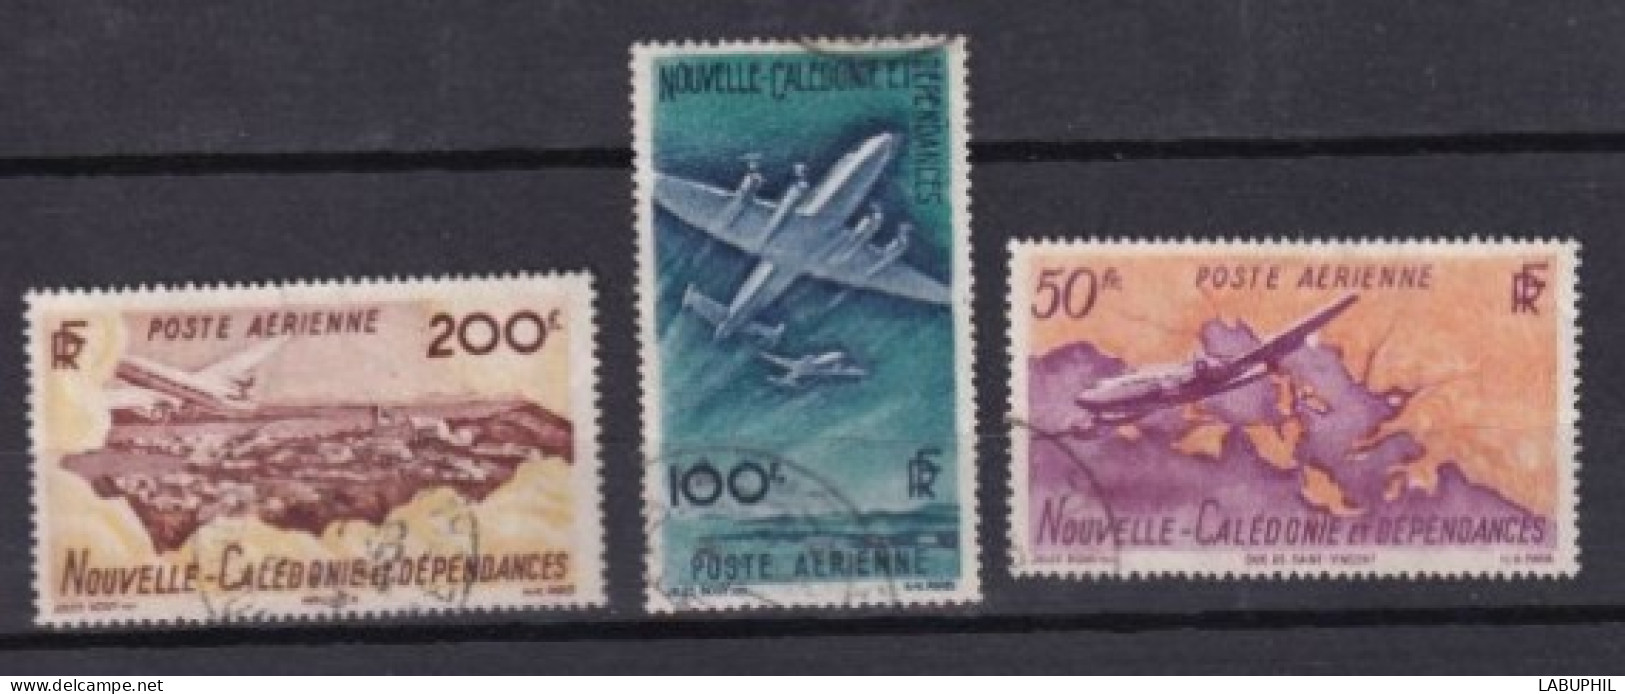 NOUVELLE CALEDONIE Dispersion D'une Collection Oblitéré Used  1948 - Used Stamps